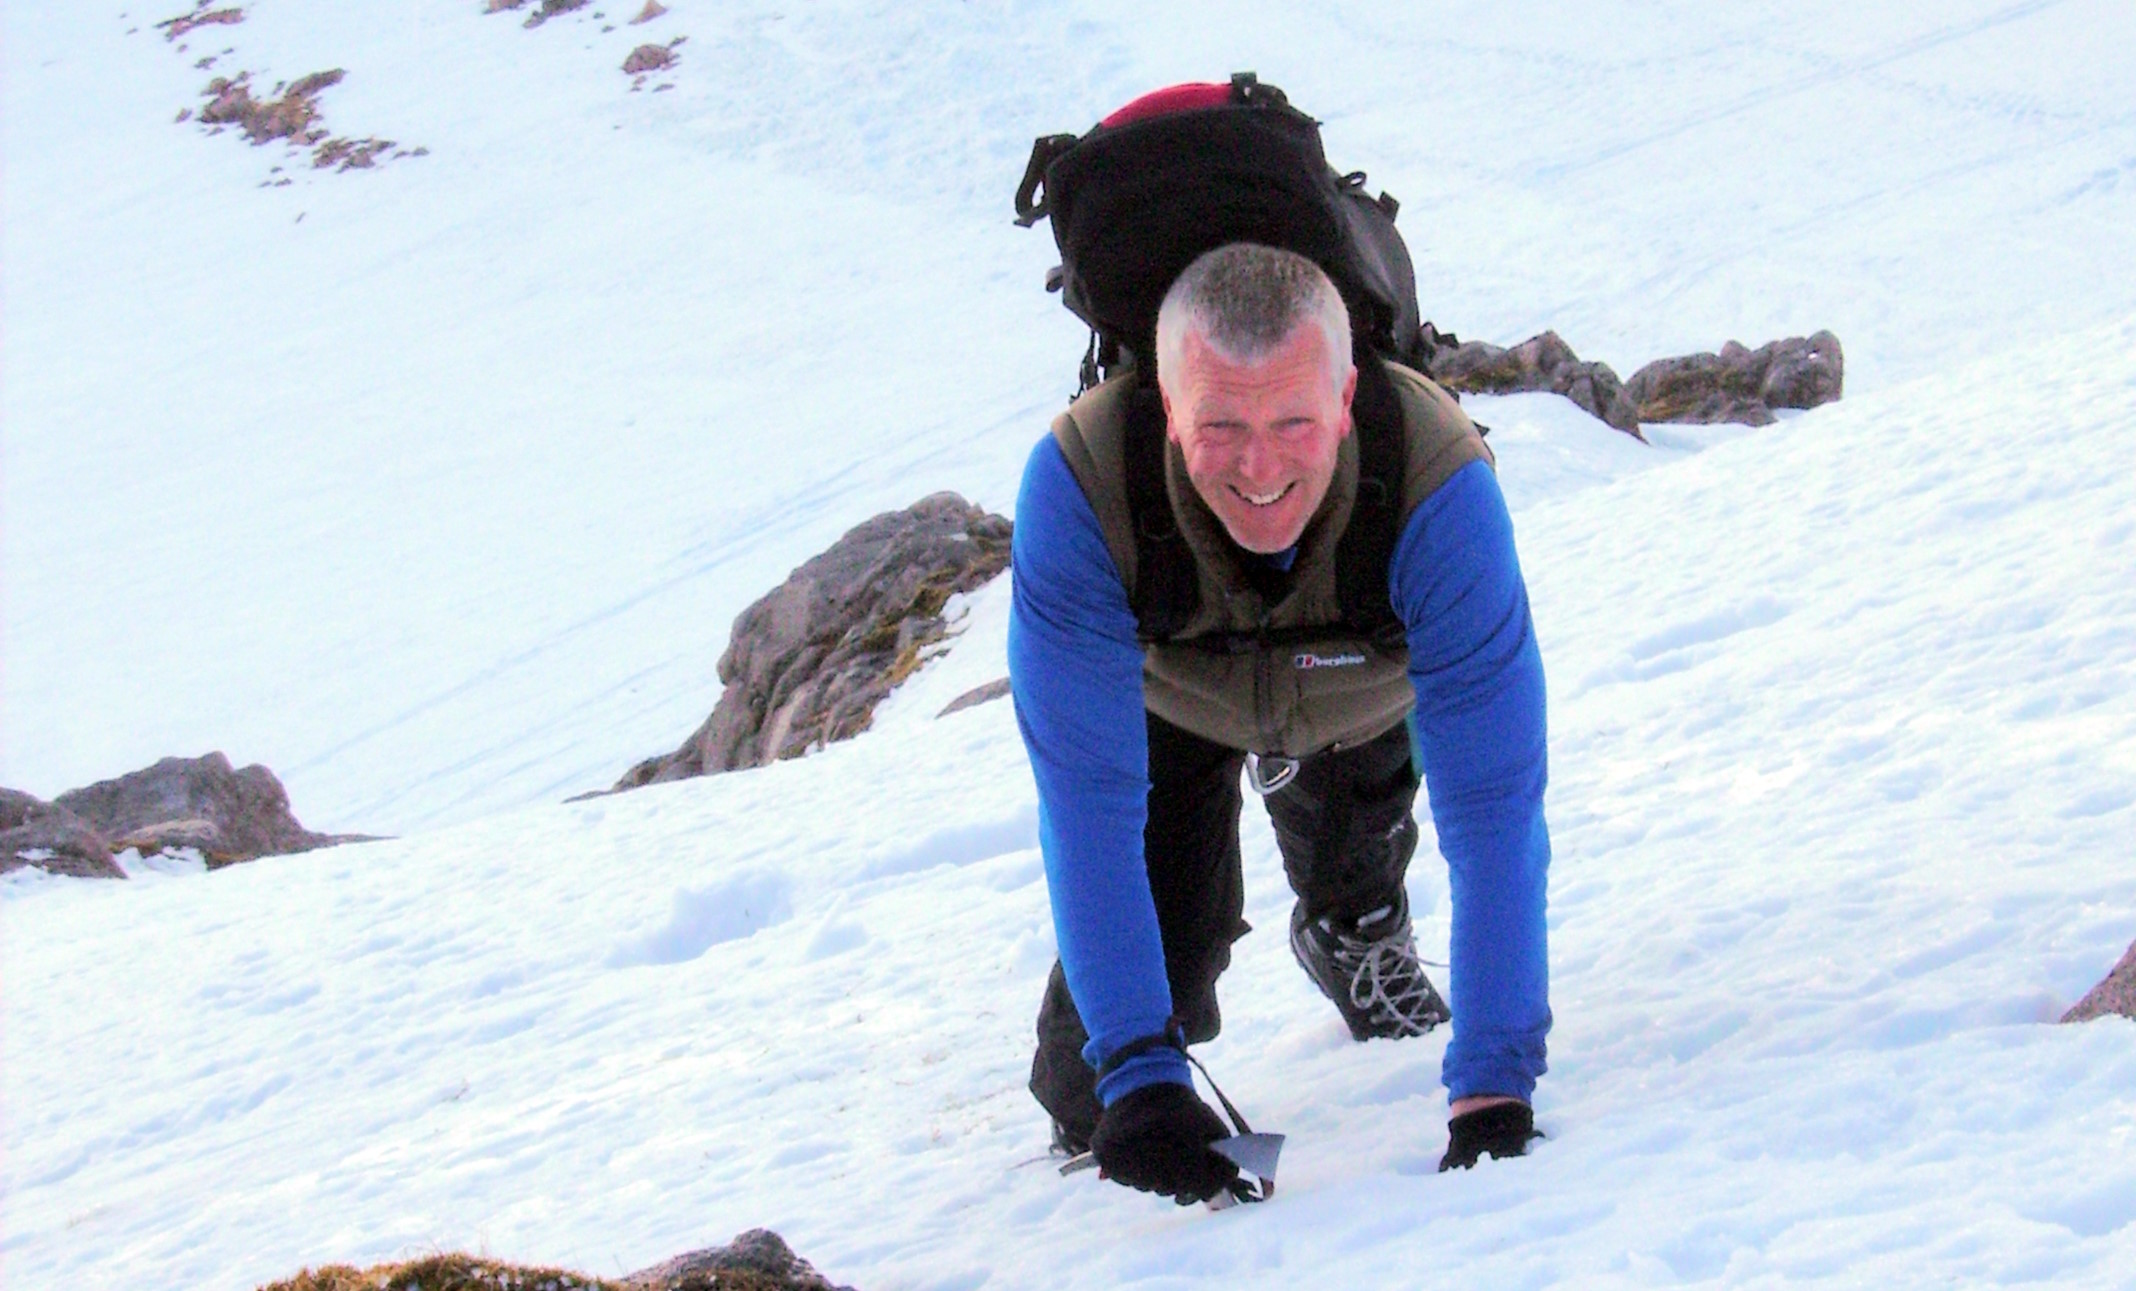 Seen from above, a man in his 50s wearing a large backpack uses mini ice axes to scramble up a steep hillside of powdered snow and rocks.